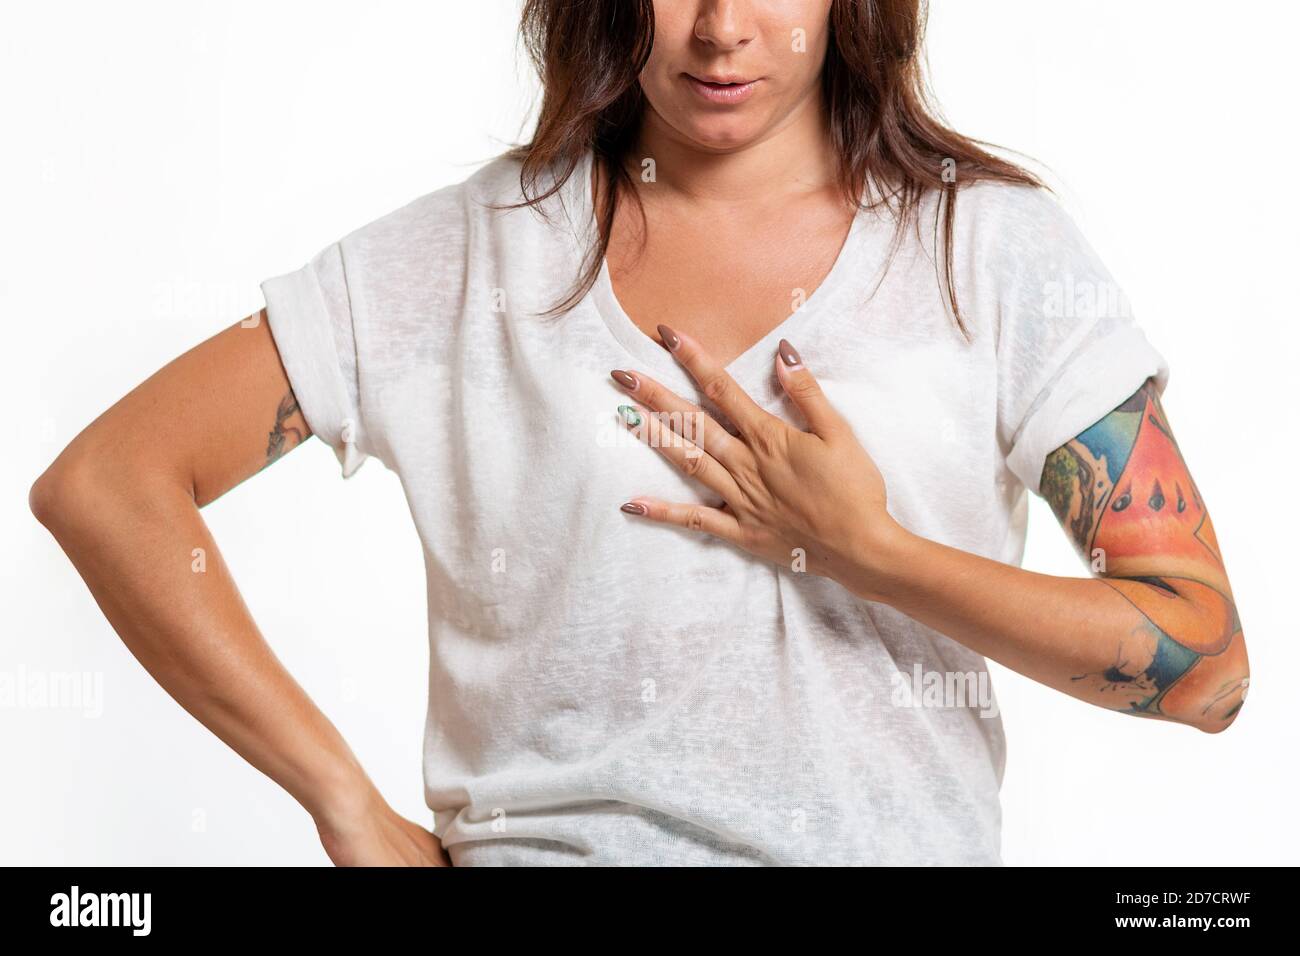 World heart day. A young woman with a tattoo on her arm grabs her chest.  White background. Close up. The concept of heart disease Stock Photo - Alamy